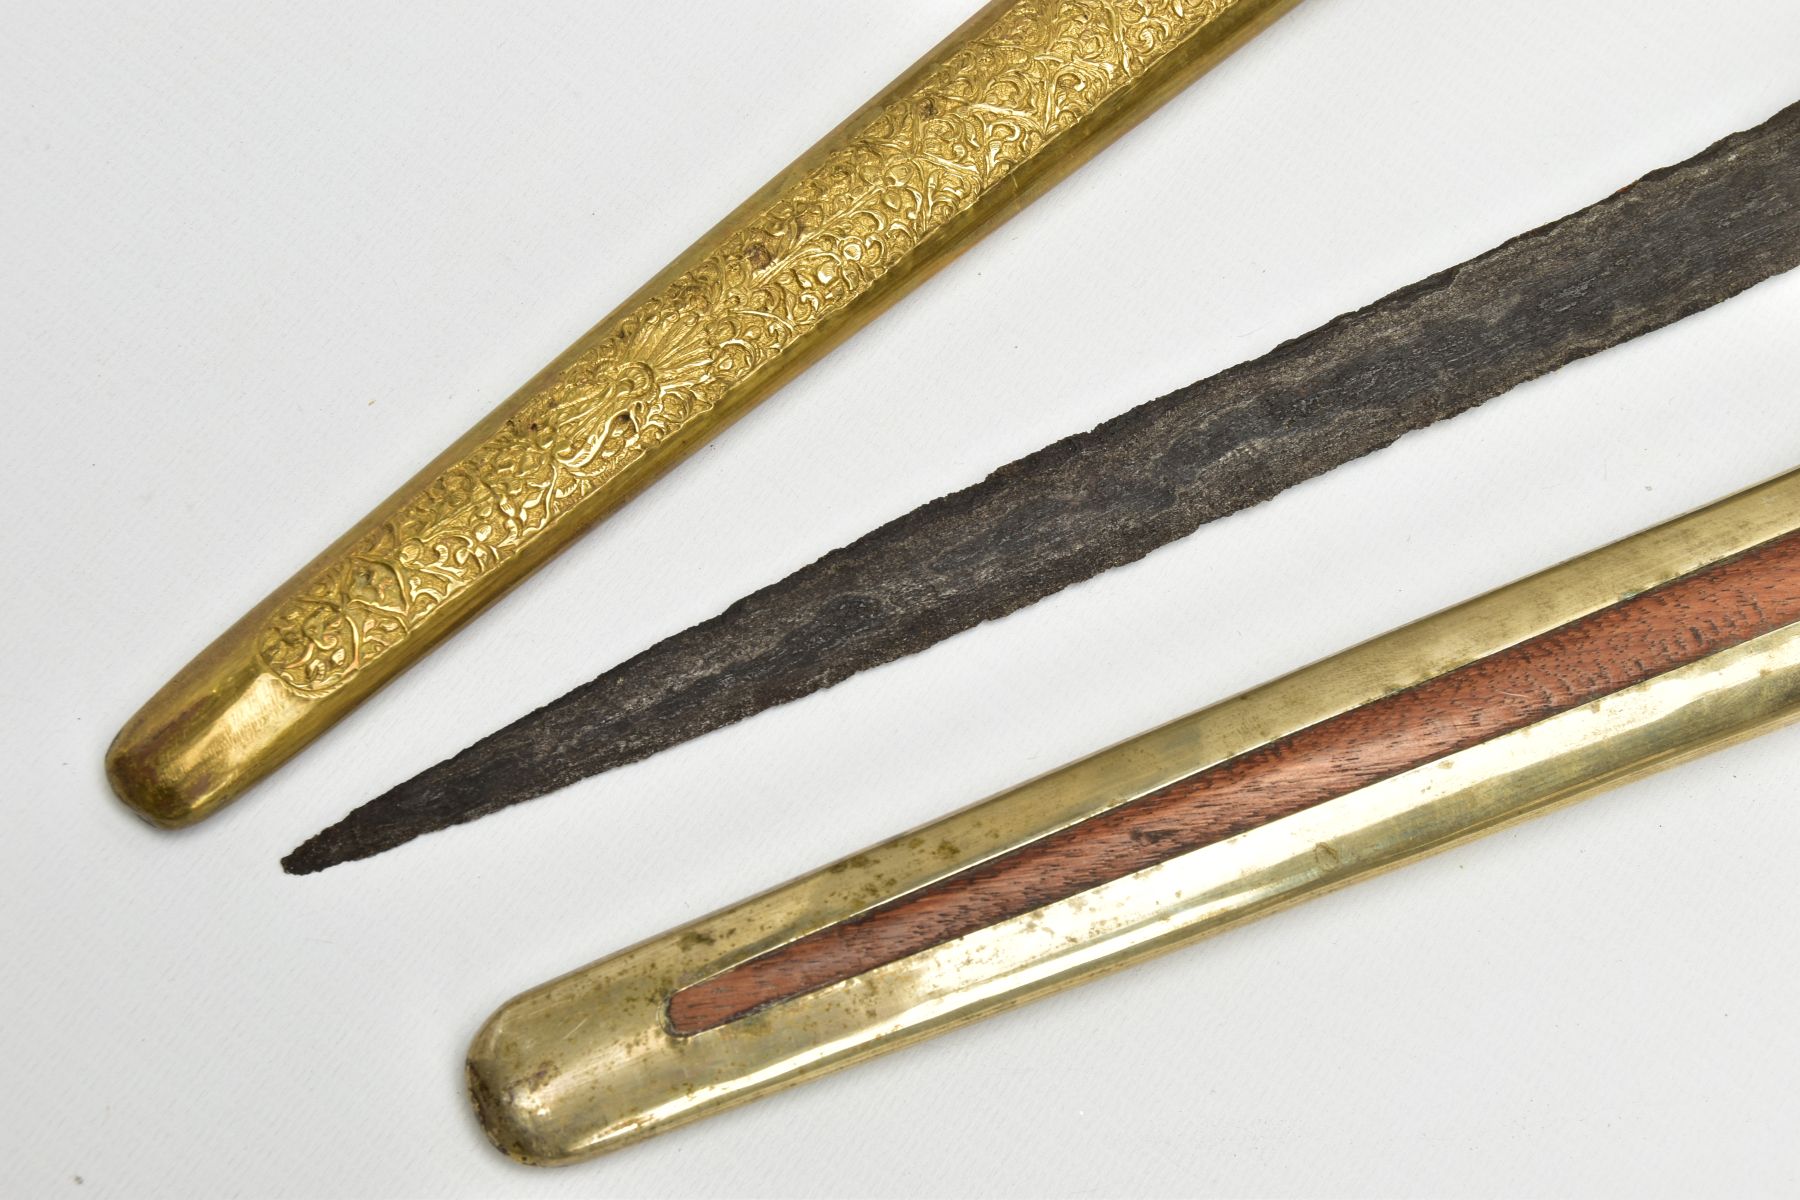 THREE MALAY/INDONESIAN KRIS DAGGERS, all straight blades(bilah), with age, the Bilah are rusted, the - Image 8 of 10